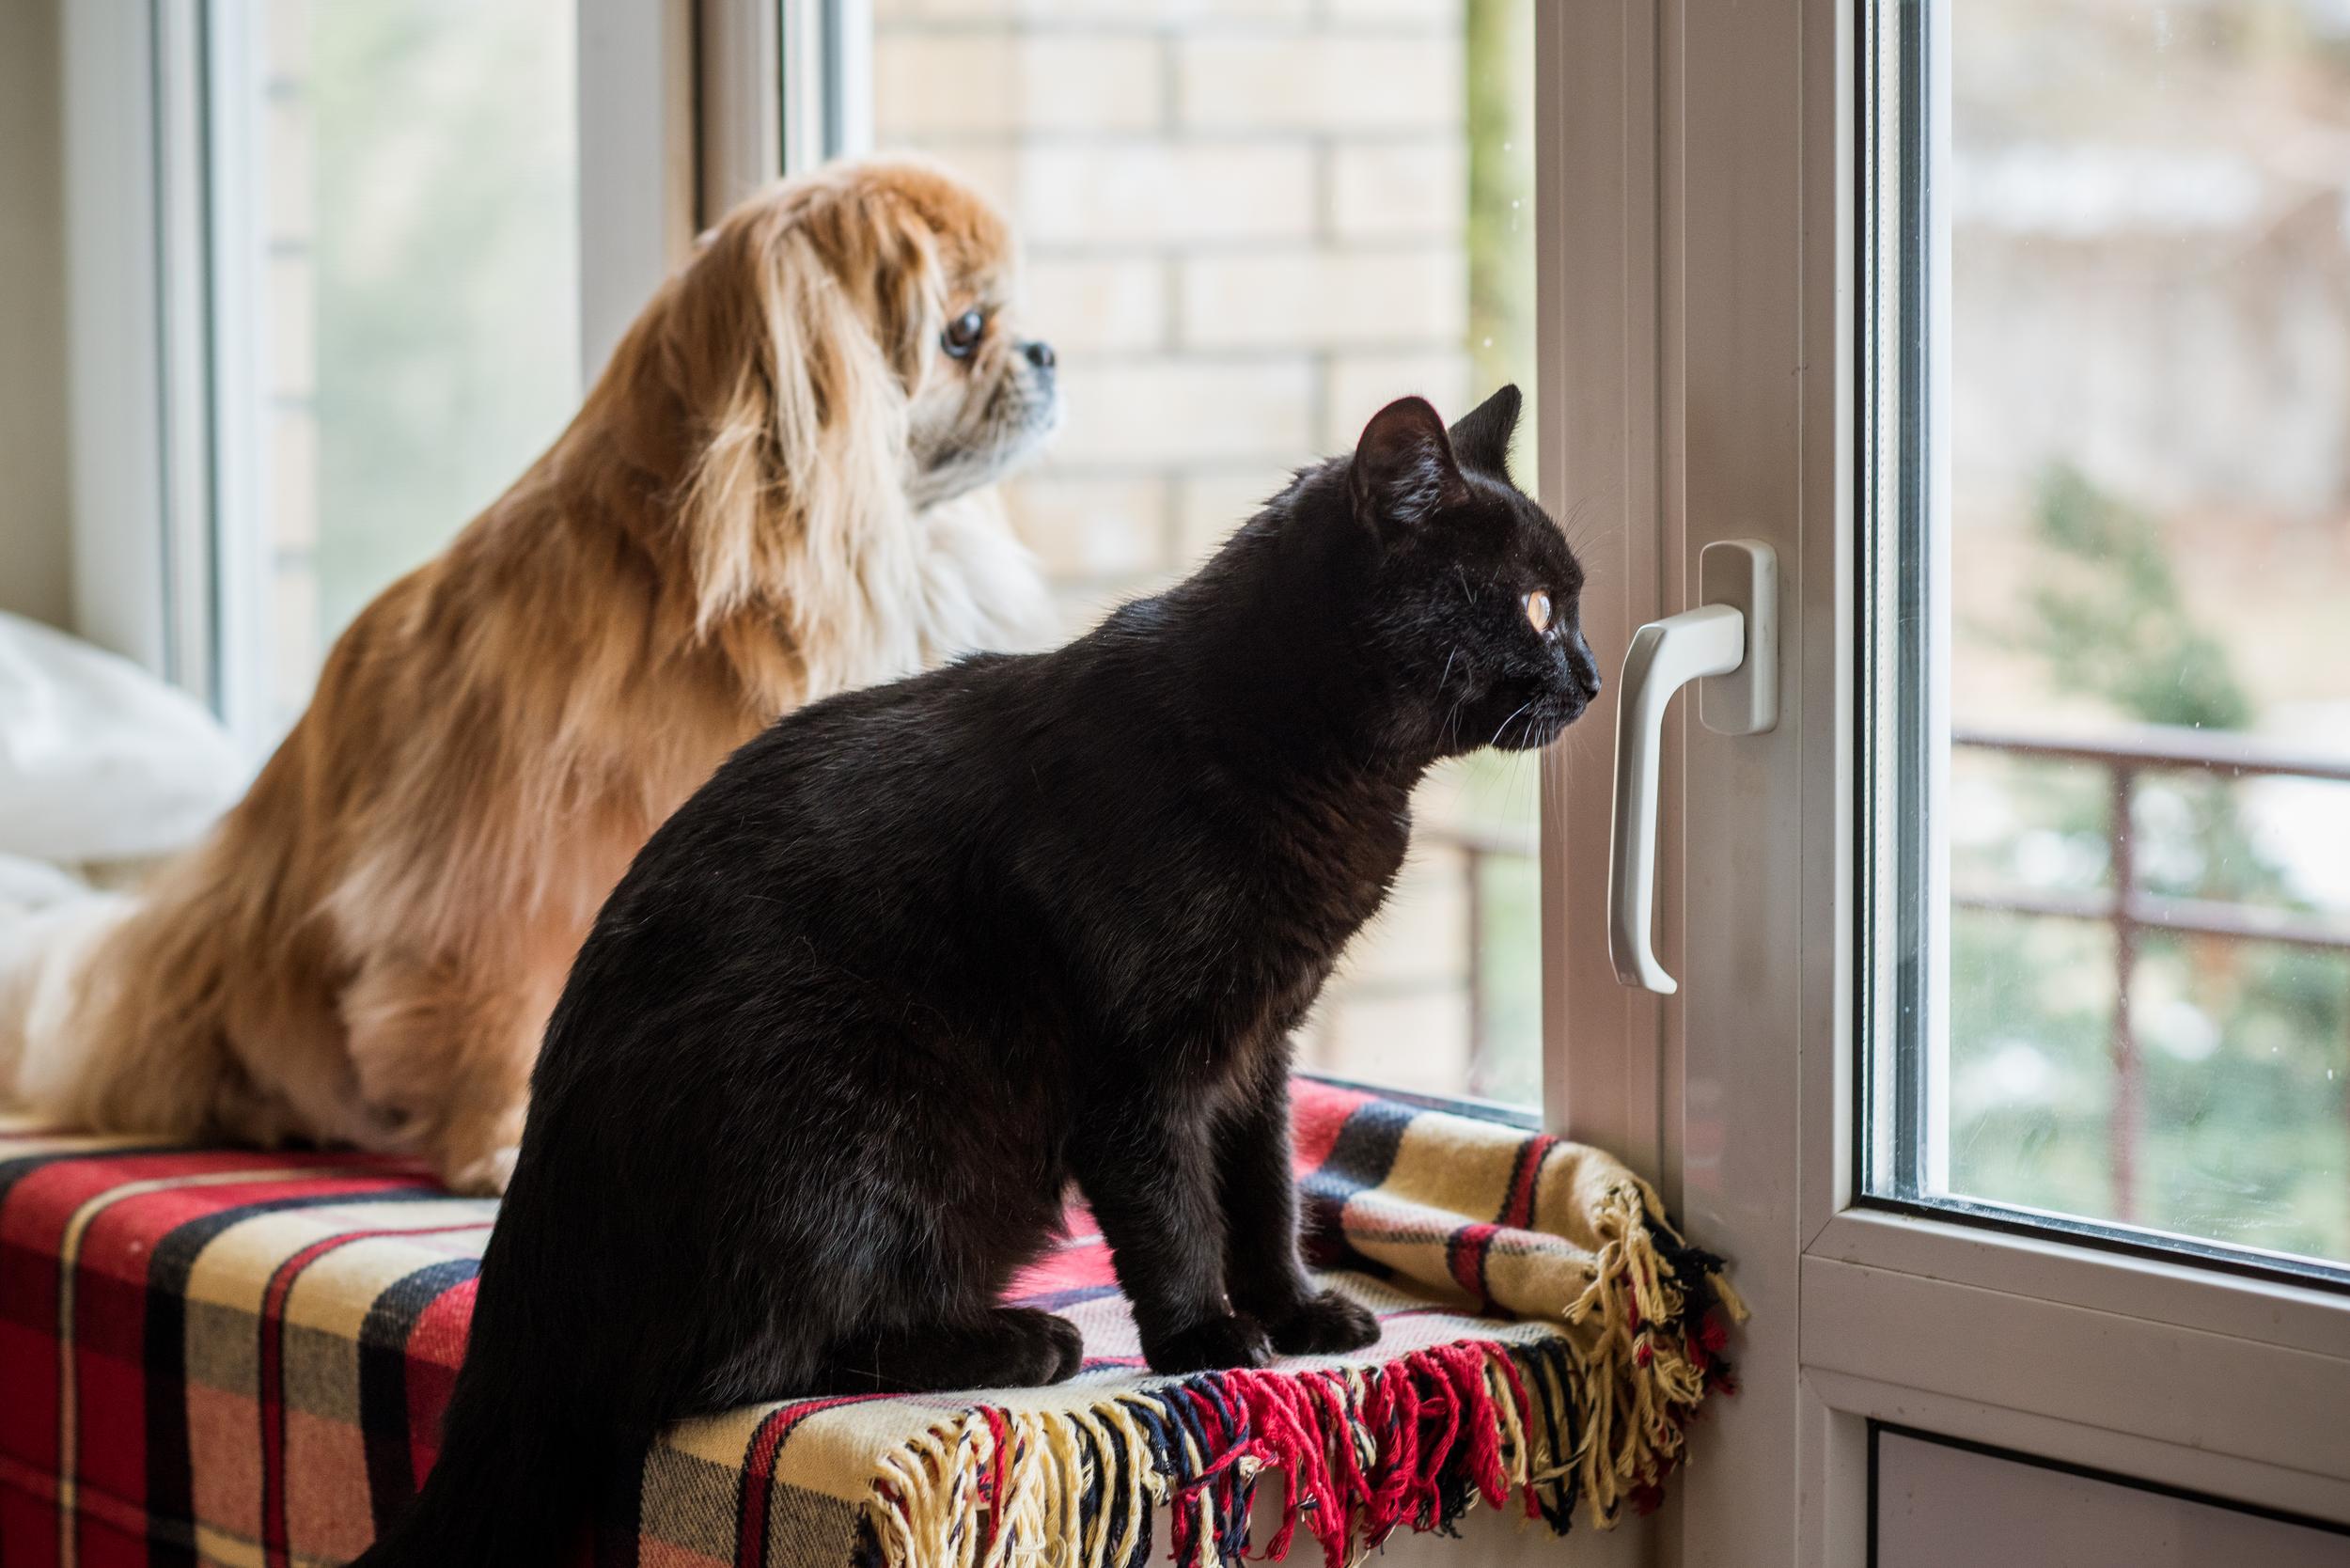 Dog and Cat Looking out window